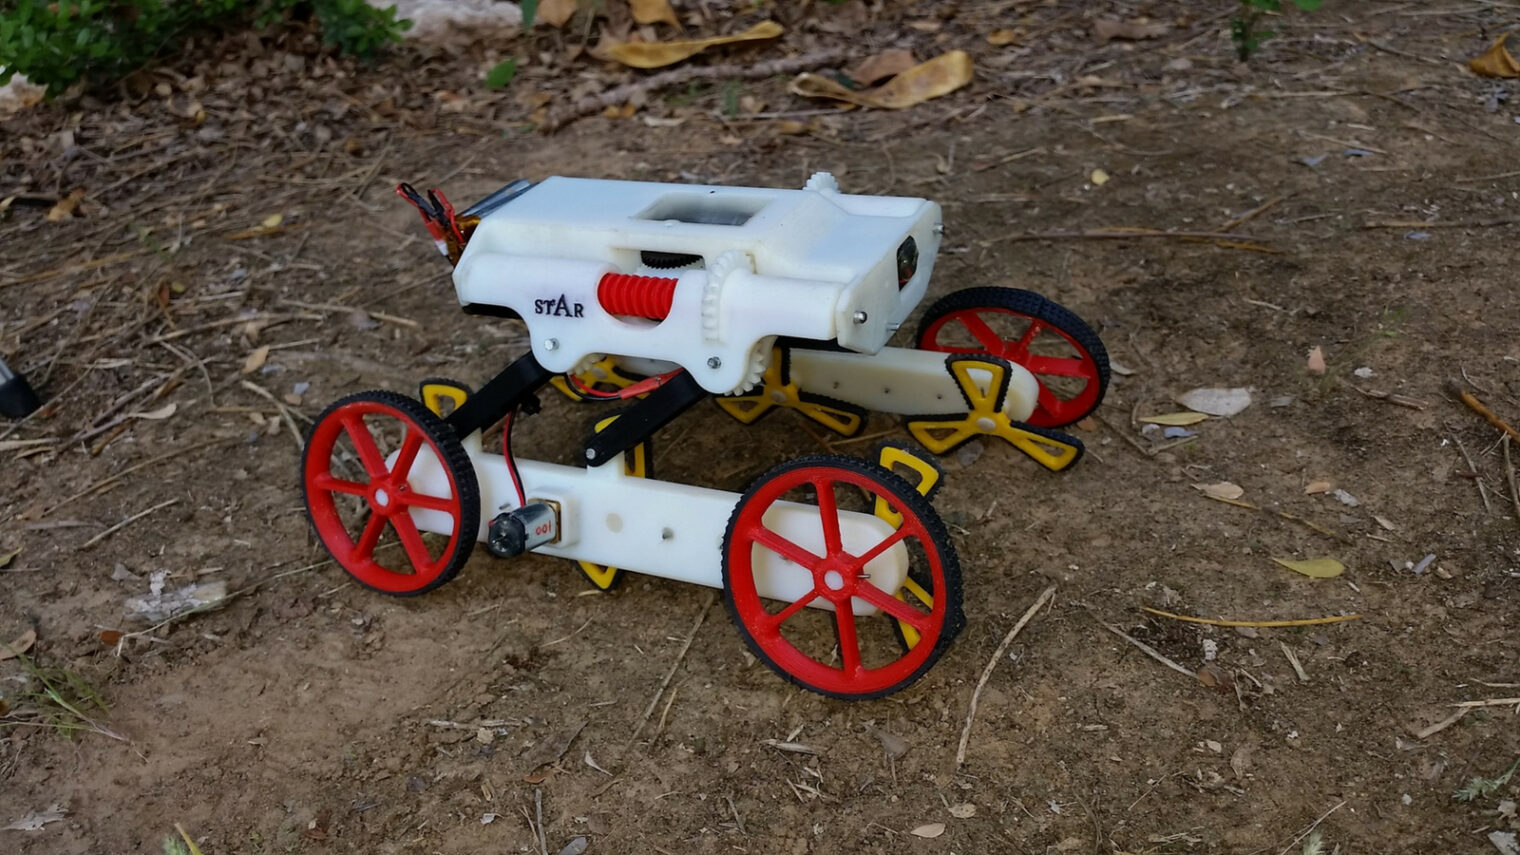 Ben-Gurion University researchers designed the Rising Sprawl-Tuned Autonomous Robot (RSTAR) to function simply and reliably without external mechanical intervention. Photo: courtesy